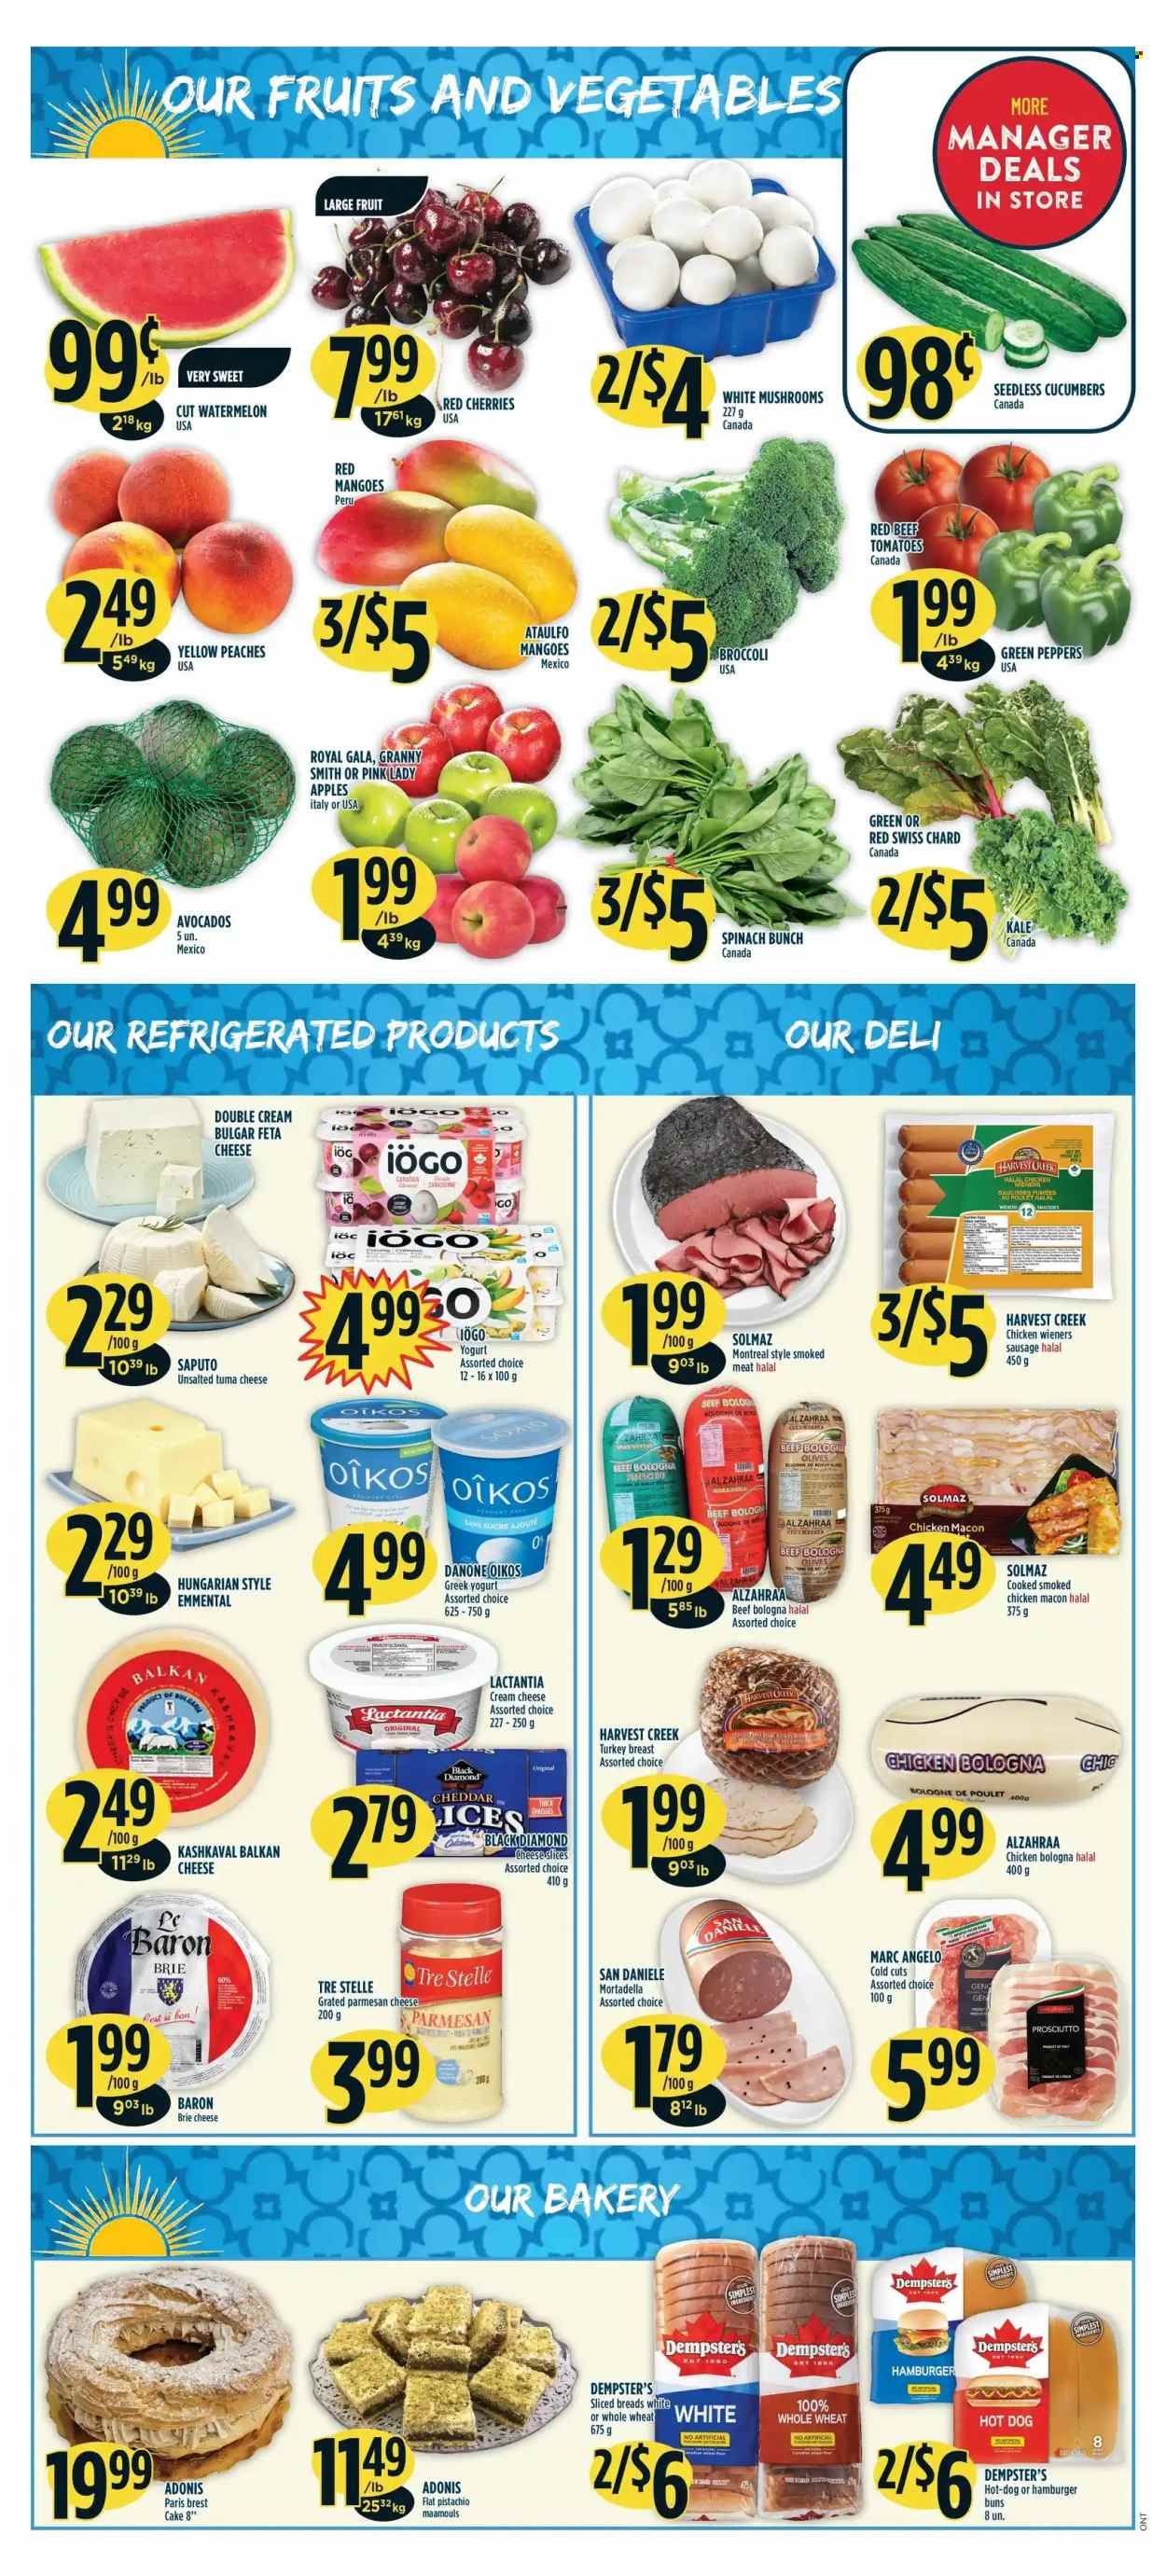 thumbnail - Adonis Flyer - June 30, 2022 - July 06, 2022 - Sales products - mushrooms, cake, buns, burger buns, broccoli, cucumber, kale, peppers, apples, avocado, Gala, mango, watermelon, cherries, peaches, Granny Smith, Pink Lady, hot dog, mortadella, prosciutto, bologna sausage, sausage, cream cheese, sliced cheese, cheddar, parmesan, cheese, brie, feta, greek yoghurt, yoghurt, Oikos, turkey breast, turkey, calcium, olives, Danone. Page 4.